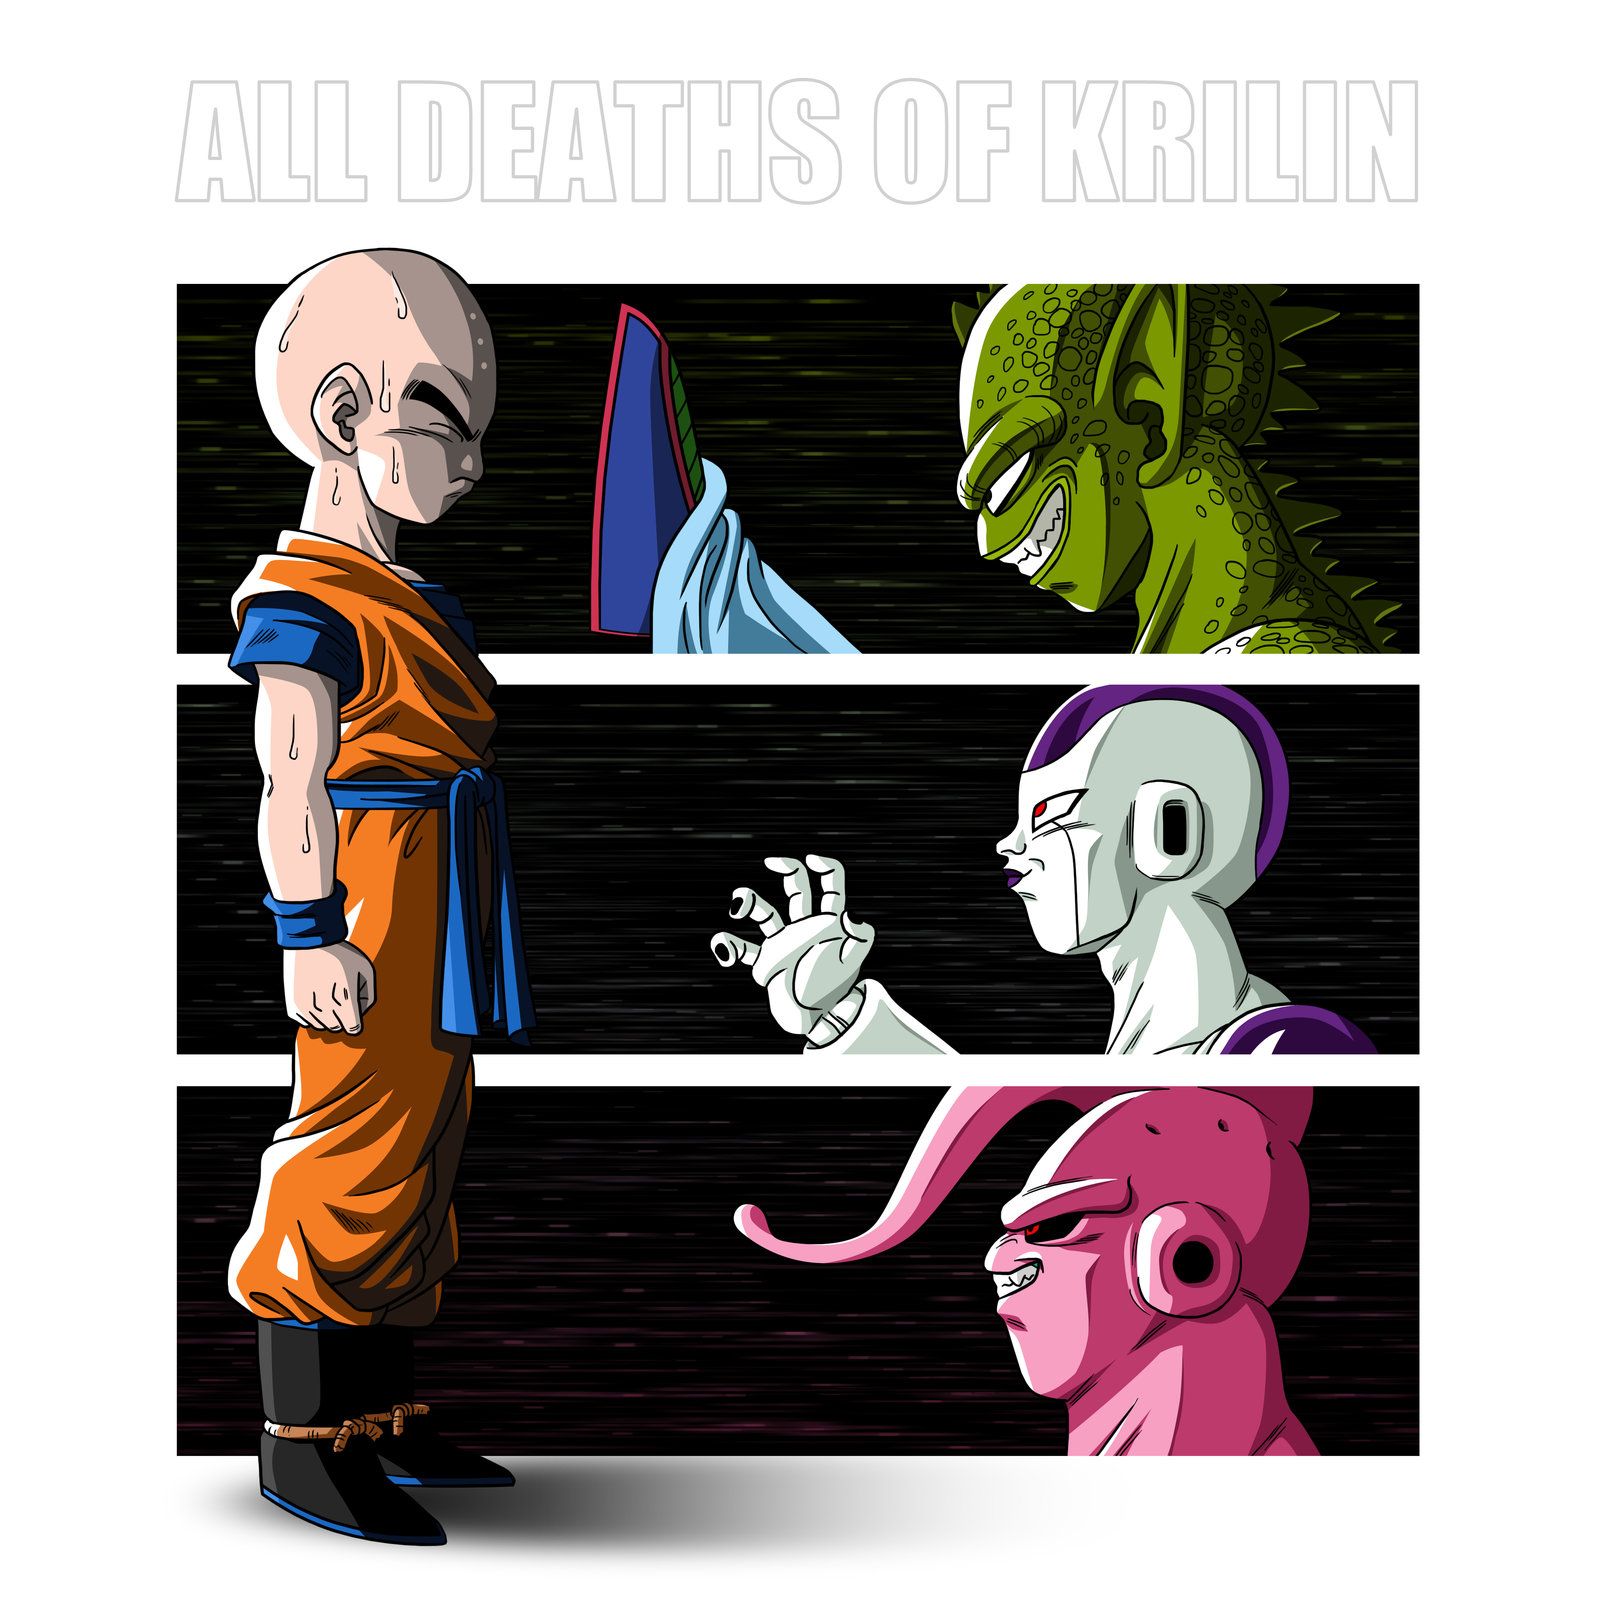 Dragon Ball 10 Hilarious Krillin Memes That Are Too Funny RELATED Dragon Ball Super 5 Theories About Ultra Instinct We Wish Were True (& 5 Truths) NEXT 5 Things Dragon Ball Super Does Better Than DBZ (& Vice Versa)